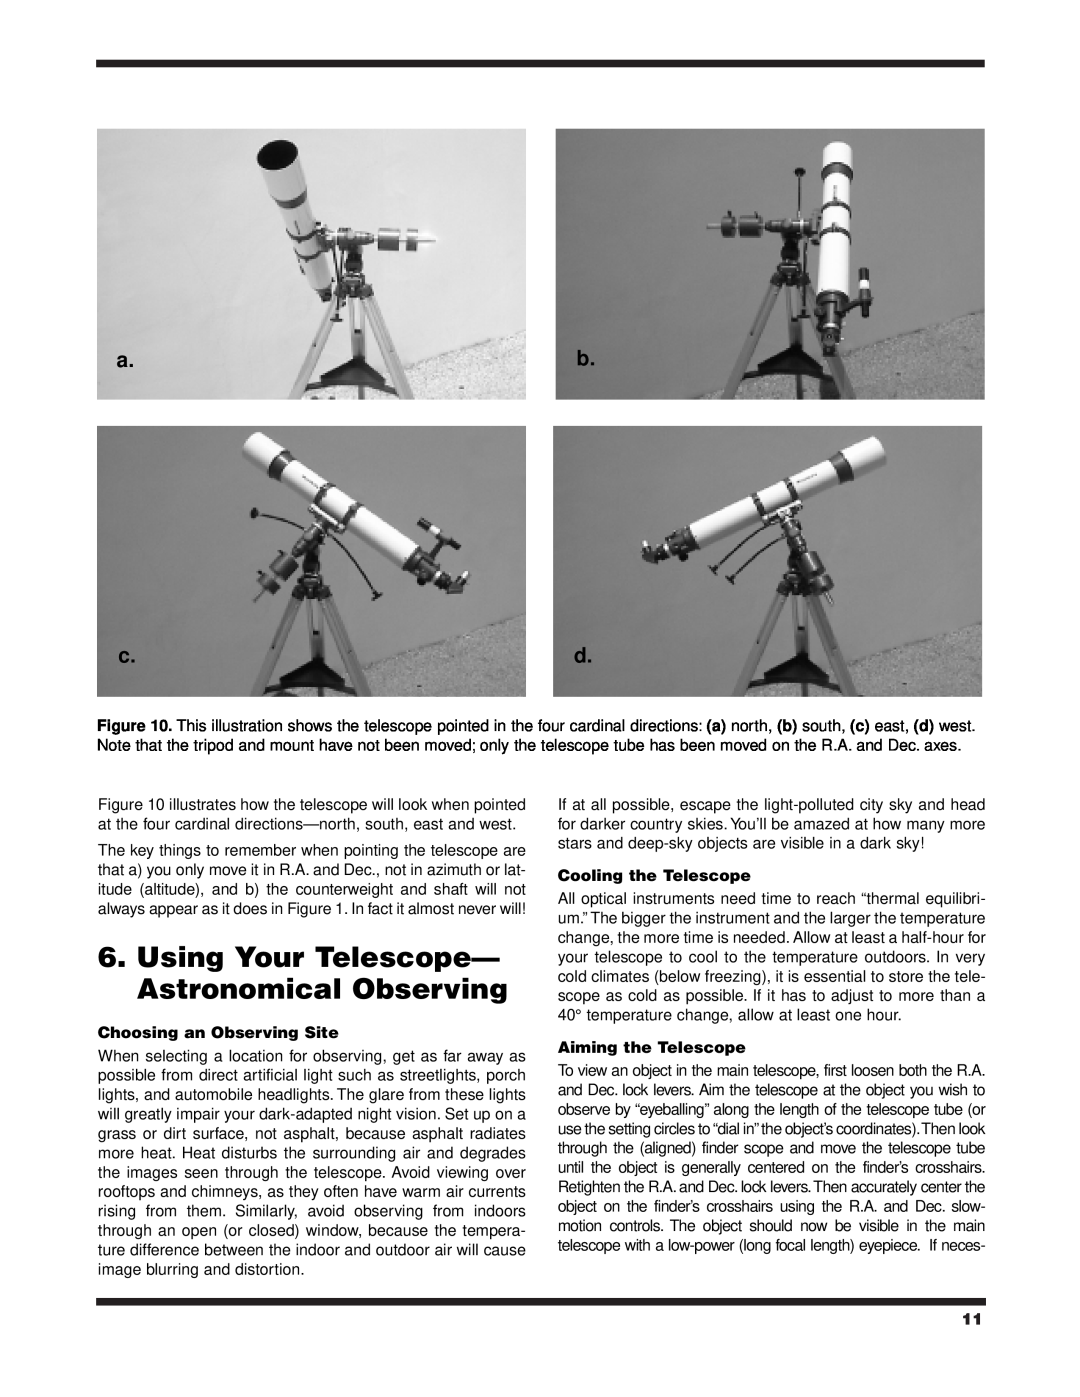 Orion 120 EQ Using Your Telescope- Astronomical Observing, Choosing an Observing Site, Cooling the Telescope 